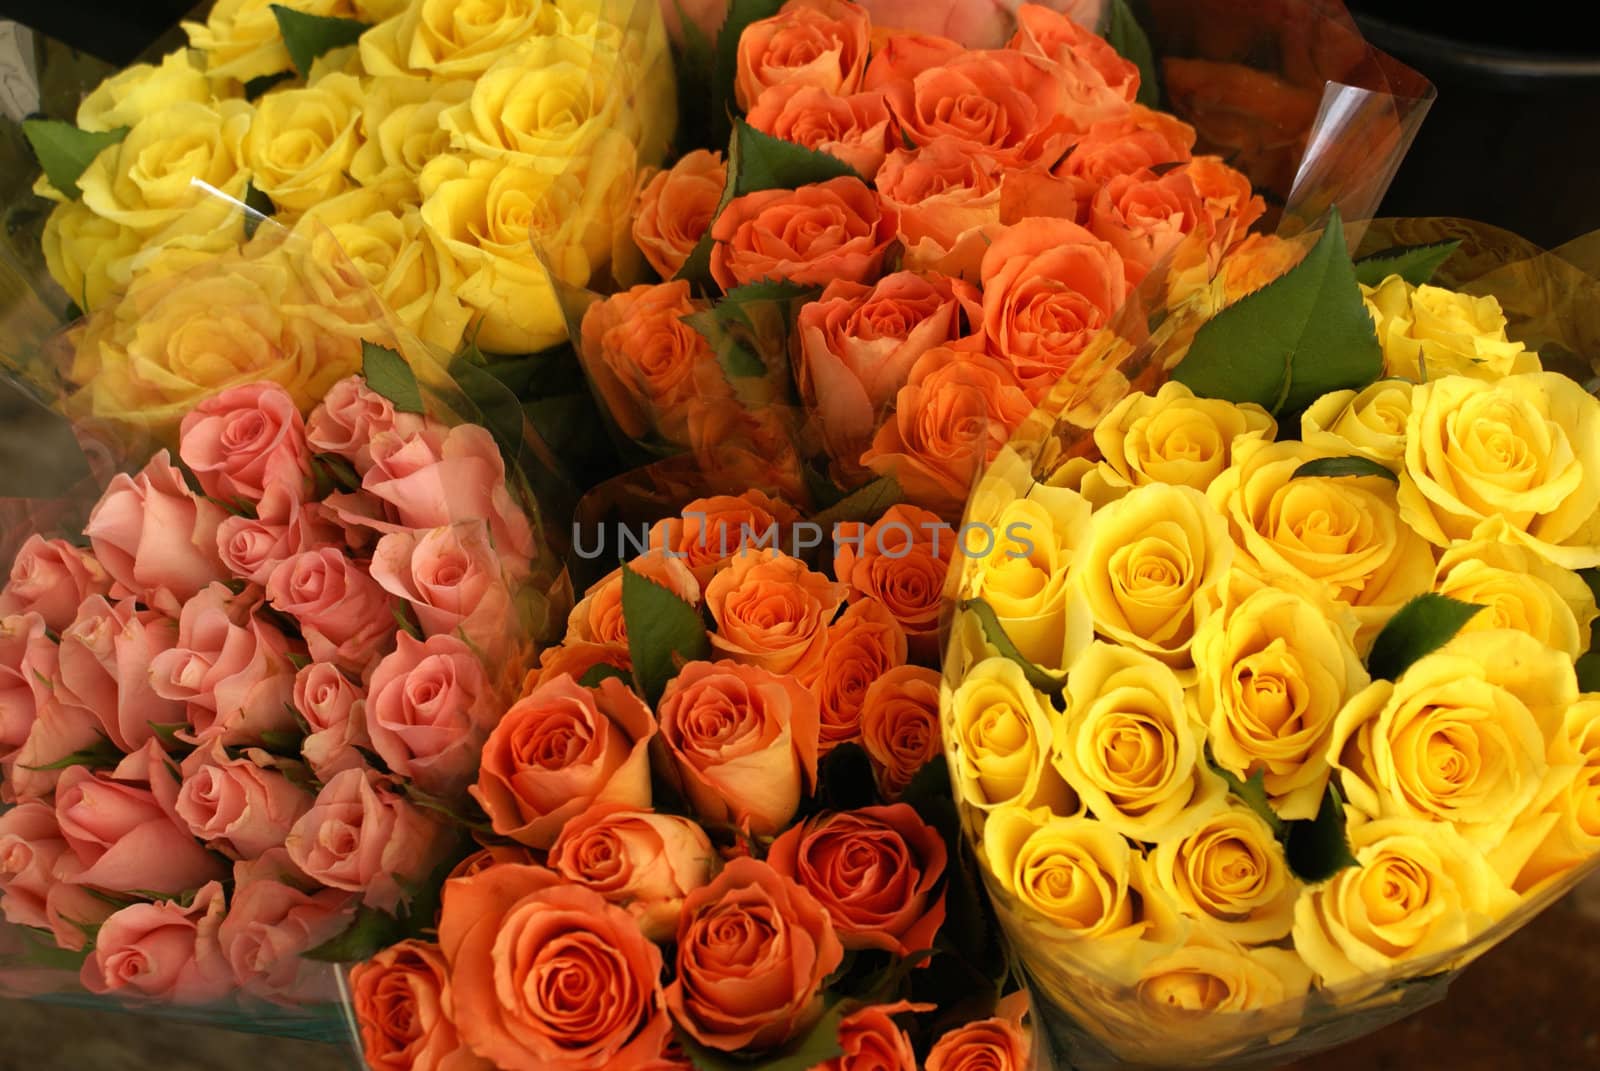 Roses in multiple spring colors.